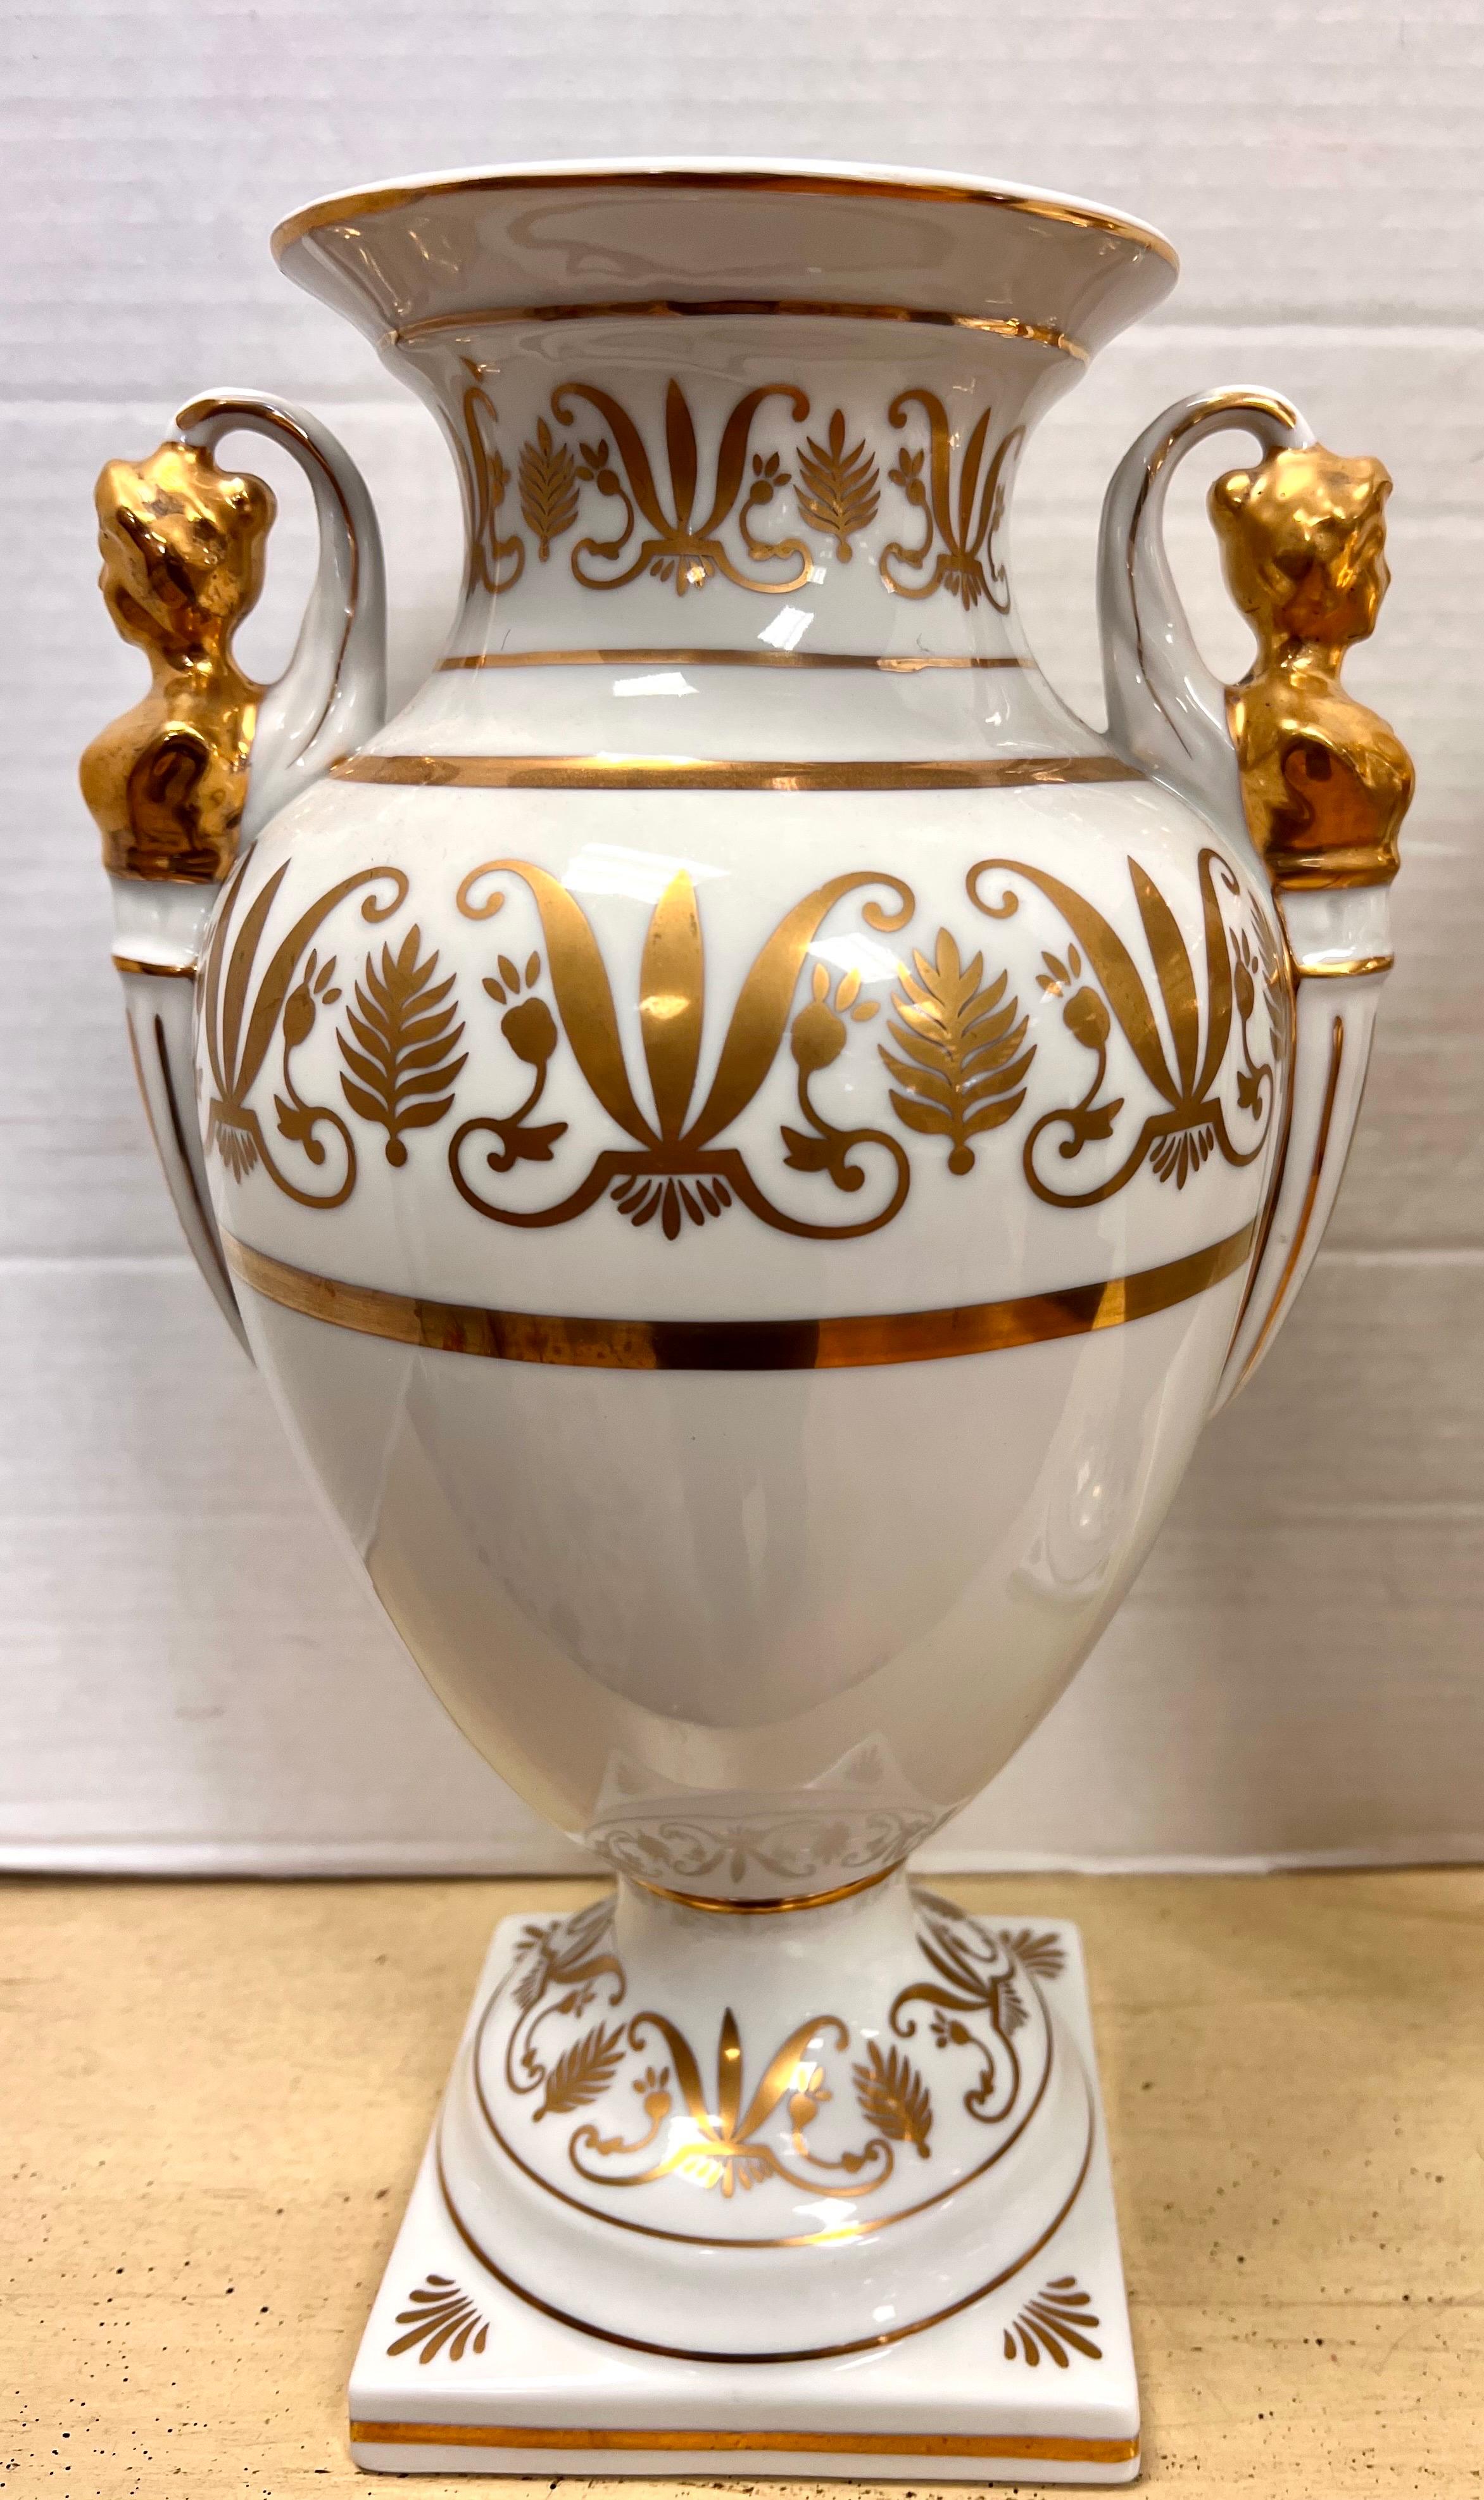 Gorgeous pair of campana porcelain urns with gold decoration and female figural handles. Each numbered on the bottom.